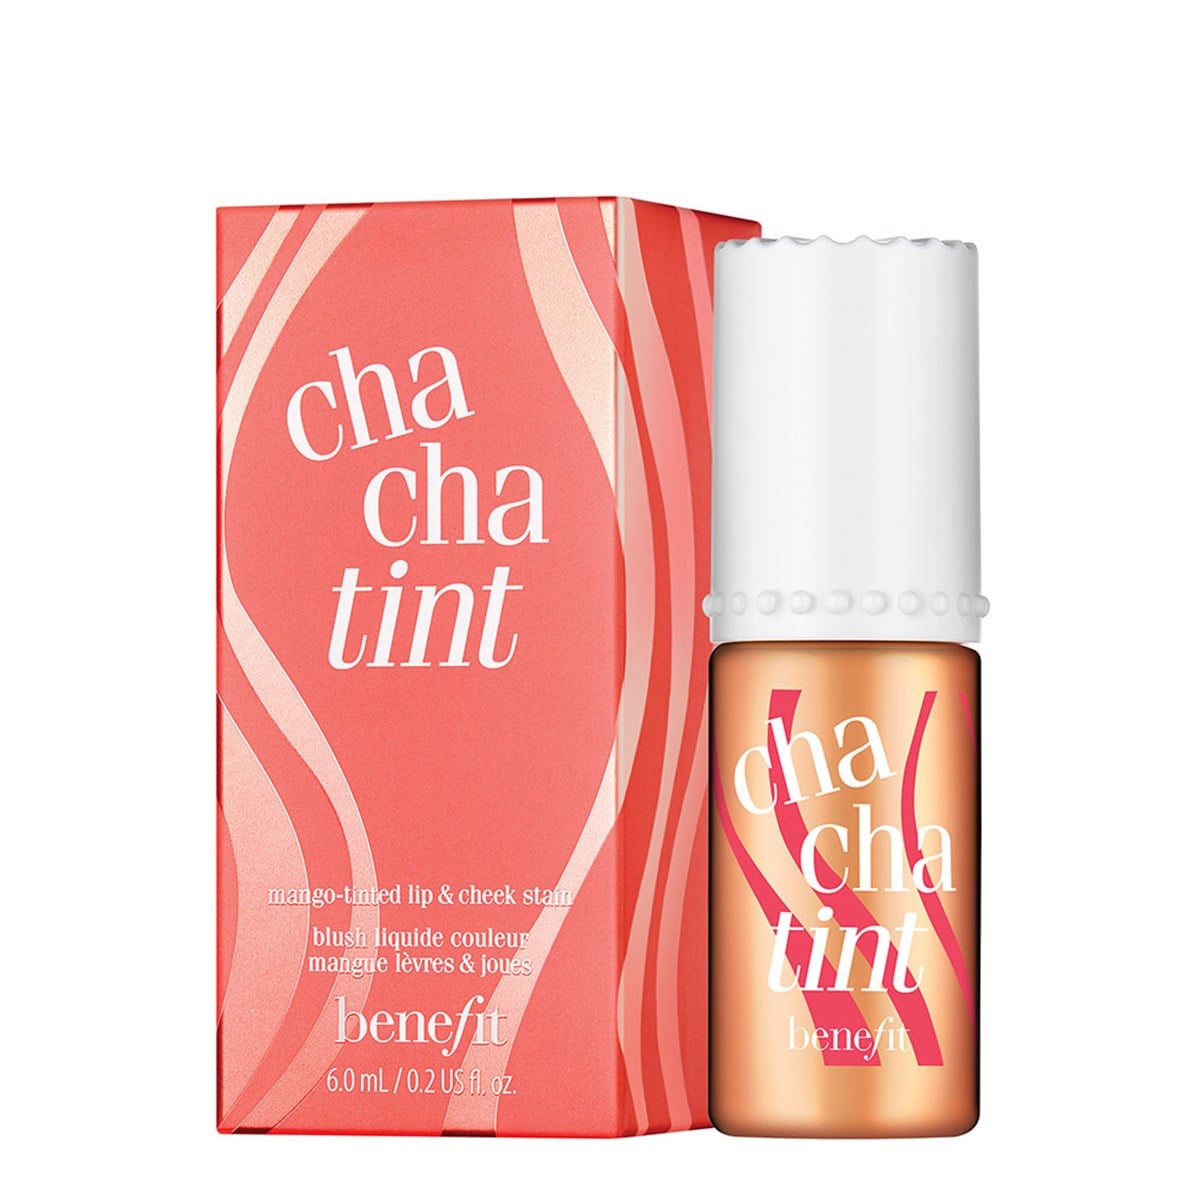 Chachatint Cheek & Lip Stain Mango-tinted lip & cheek stain by Benefit